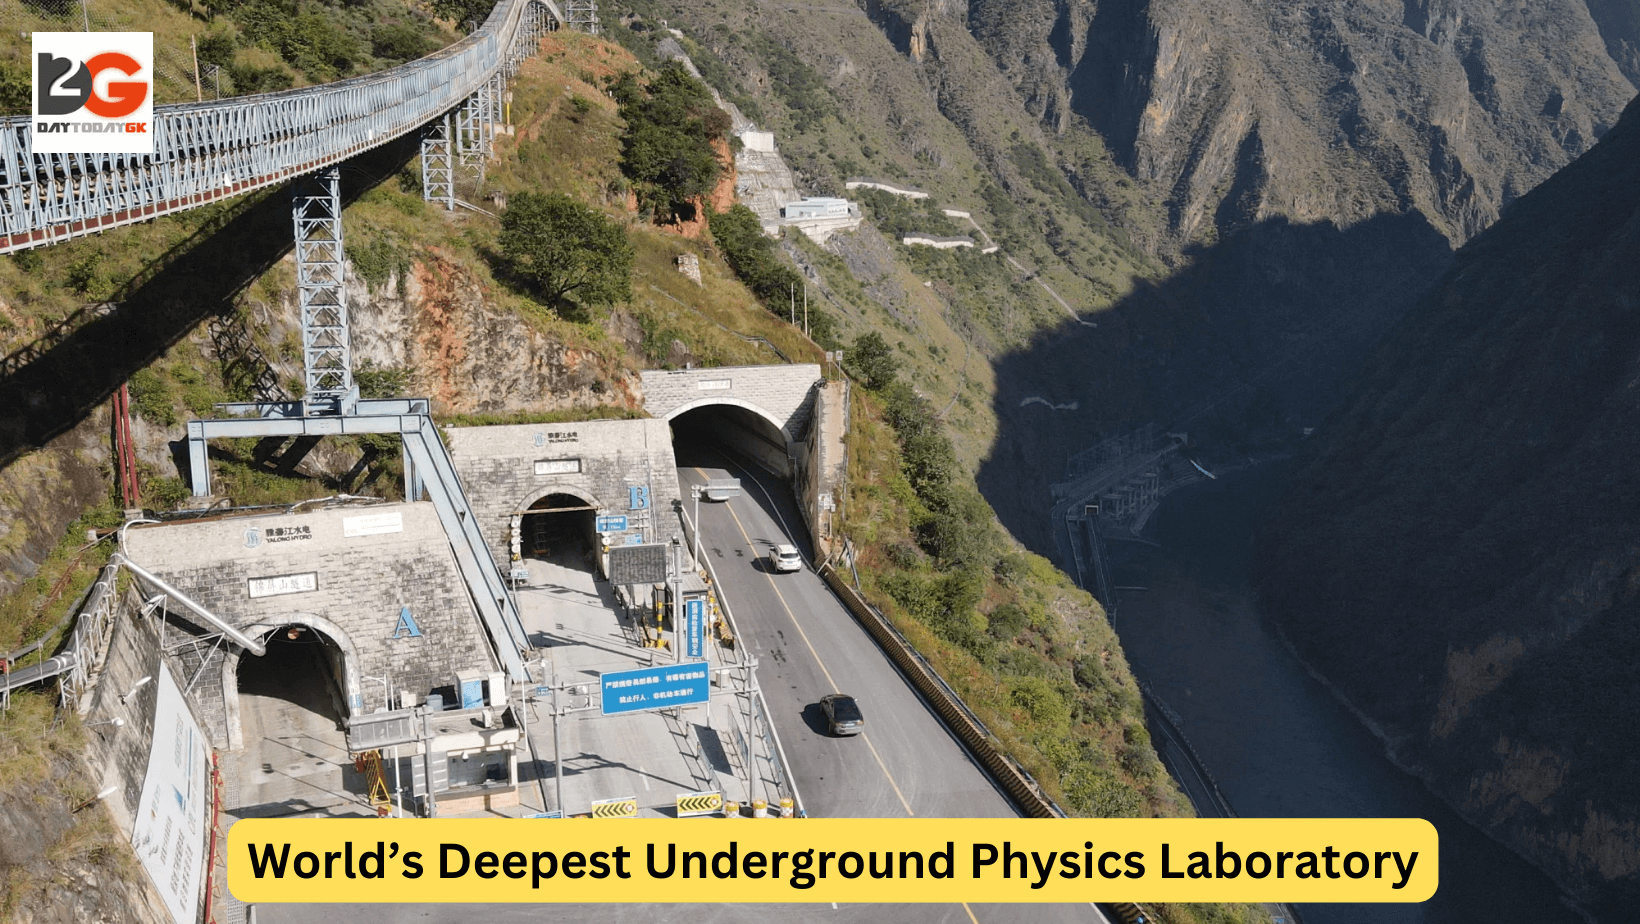 World’s Deepest Underground Physics Laboratory has launched in China